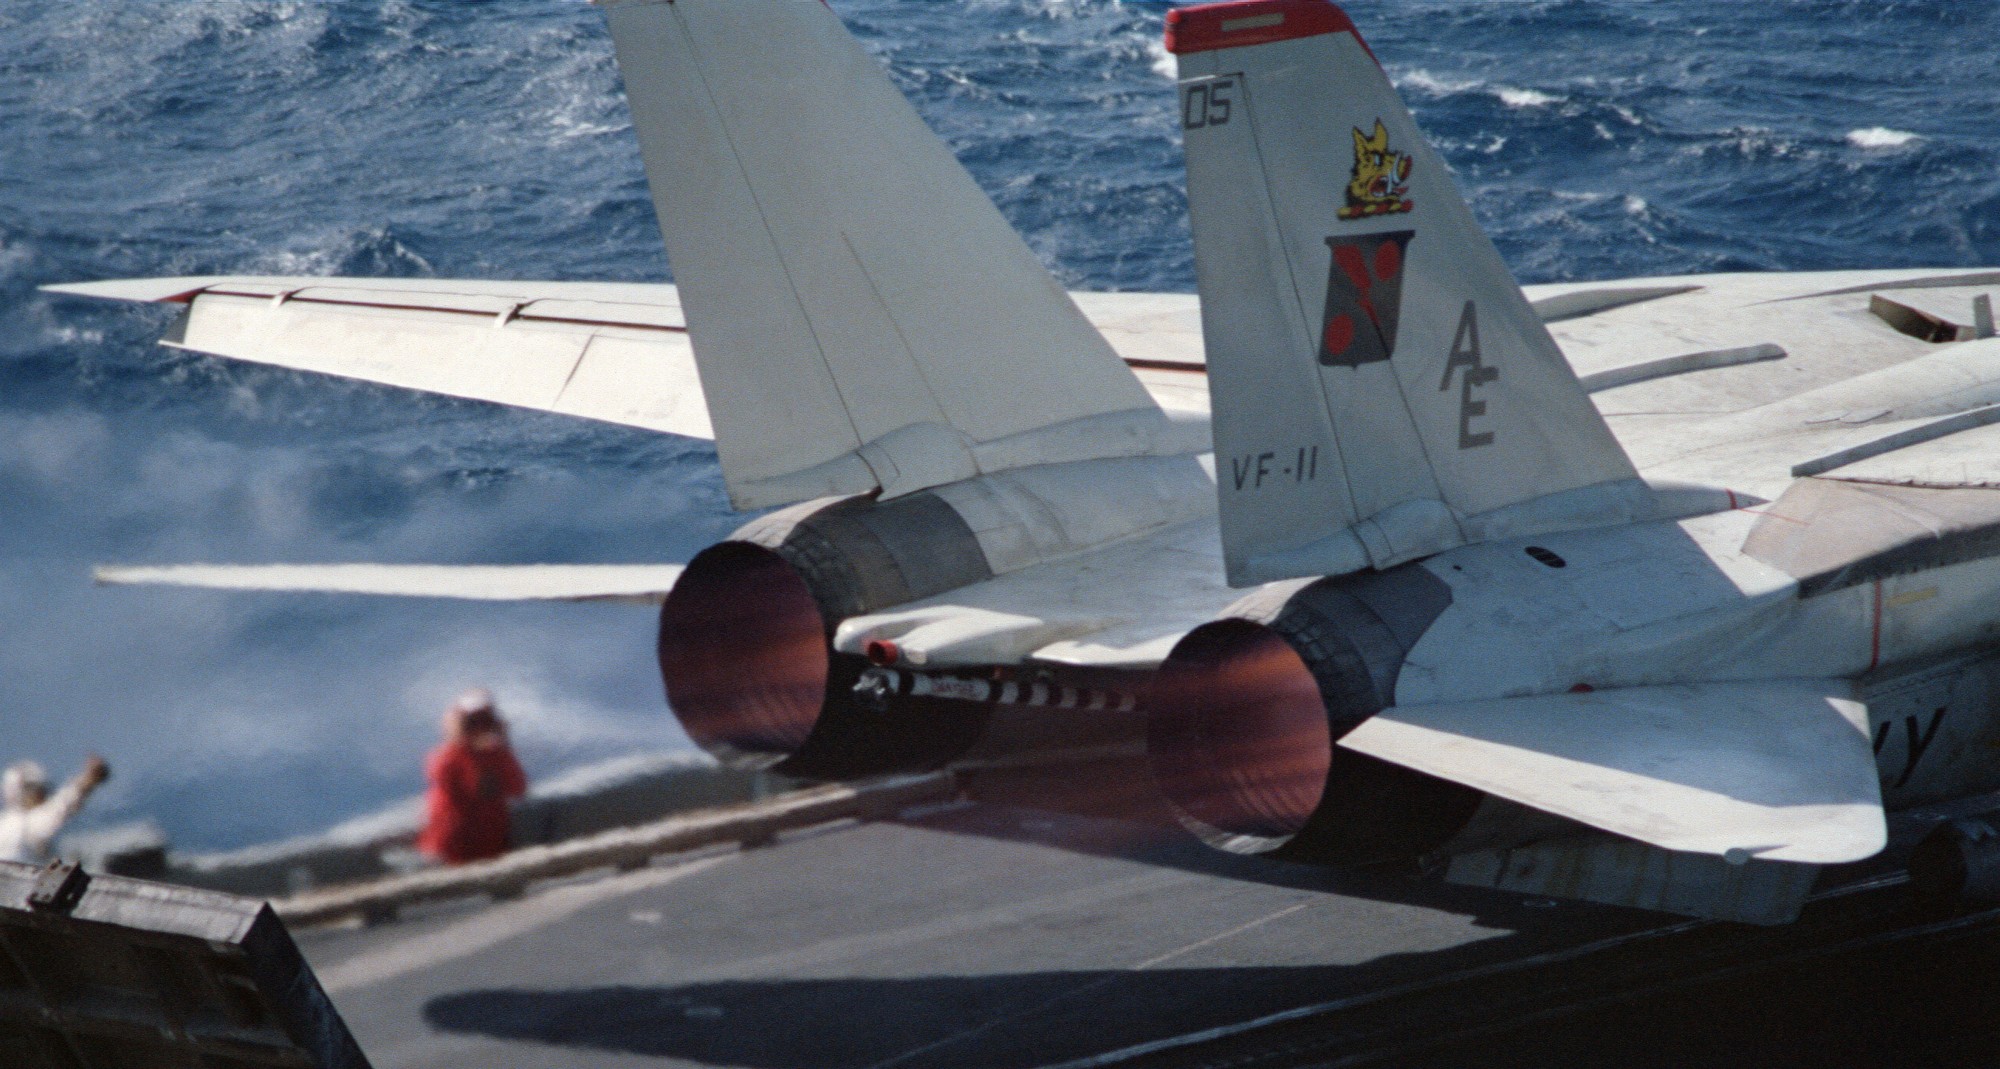 vf-11 red rippers fighter squadron us navy fitron f-14a tomcat carrier air wing cvw-6 uss forrestal cv-59 62